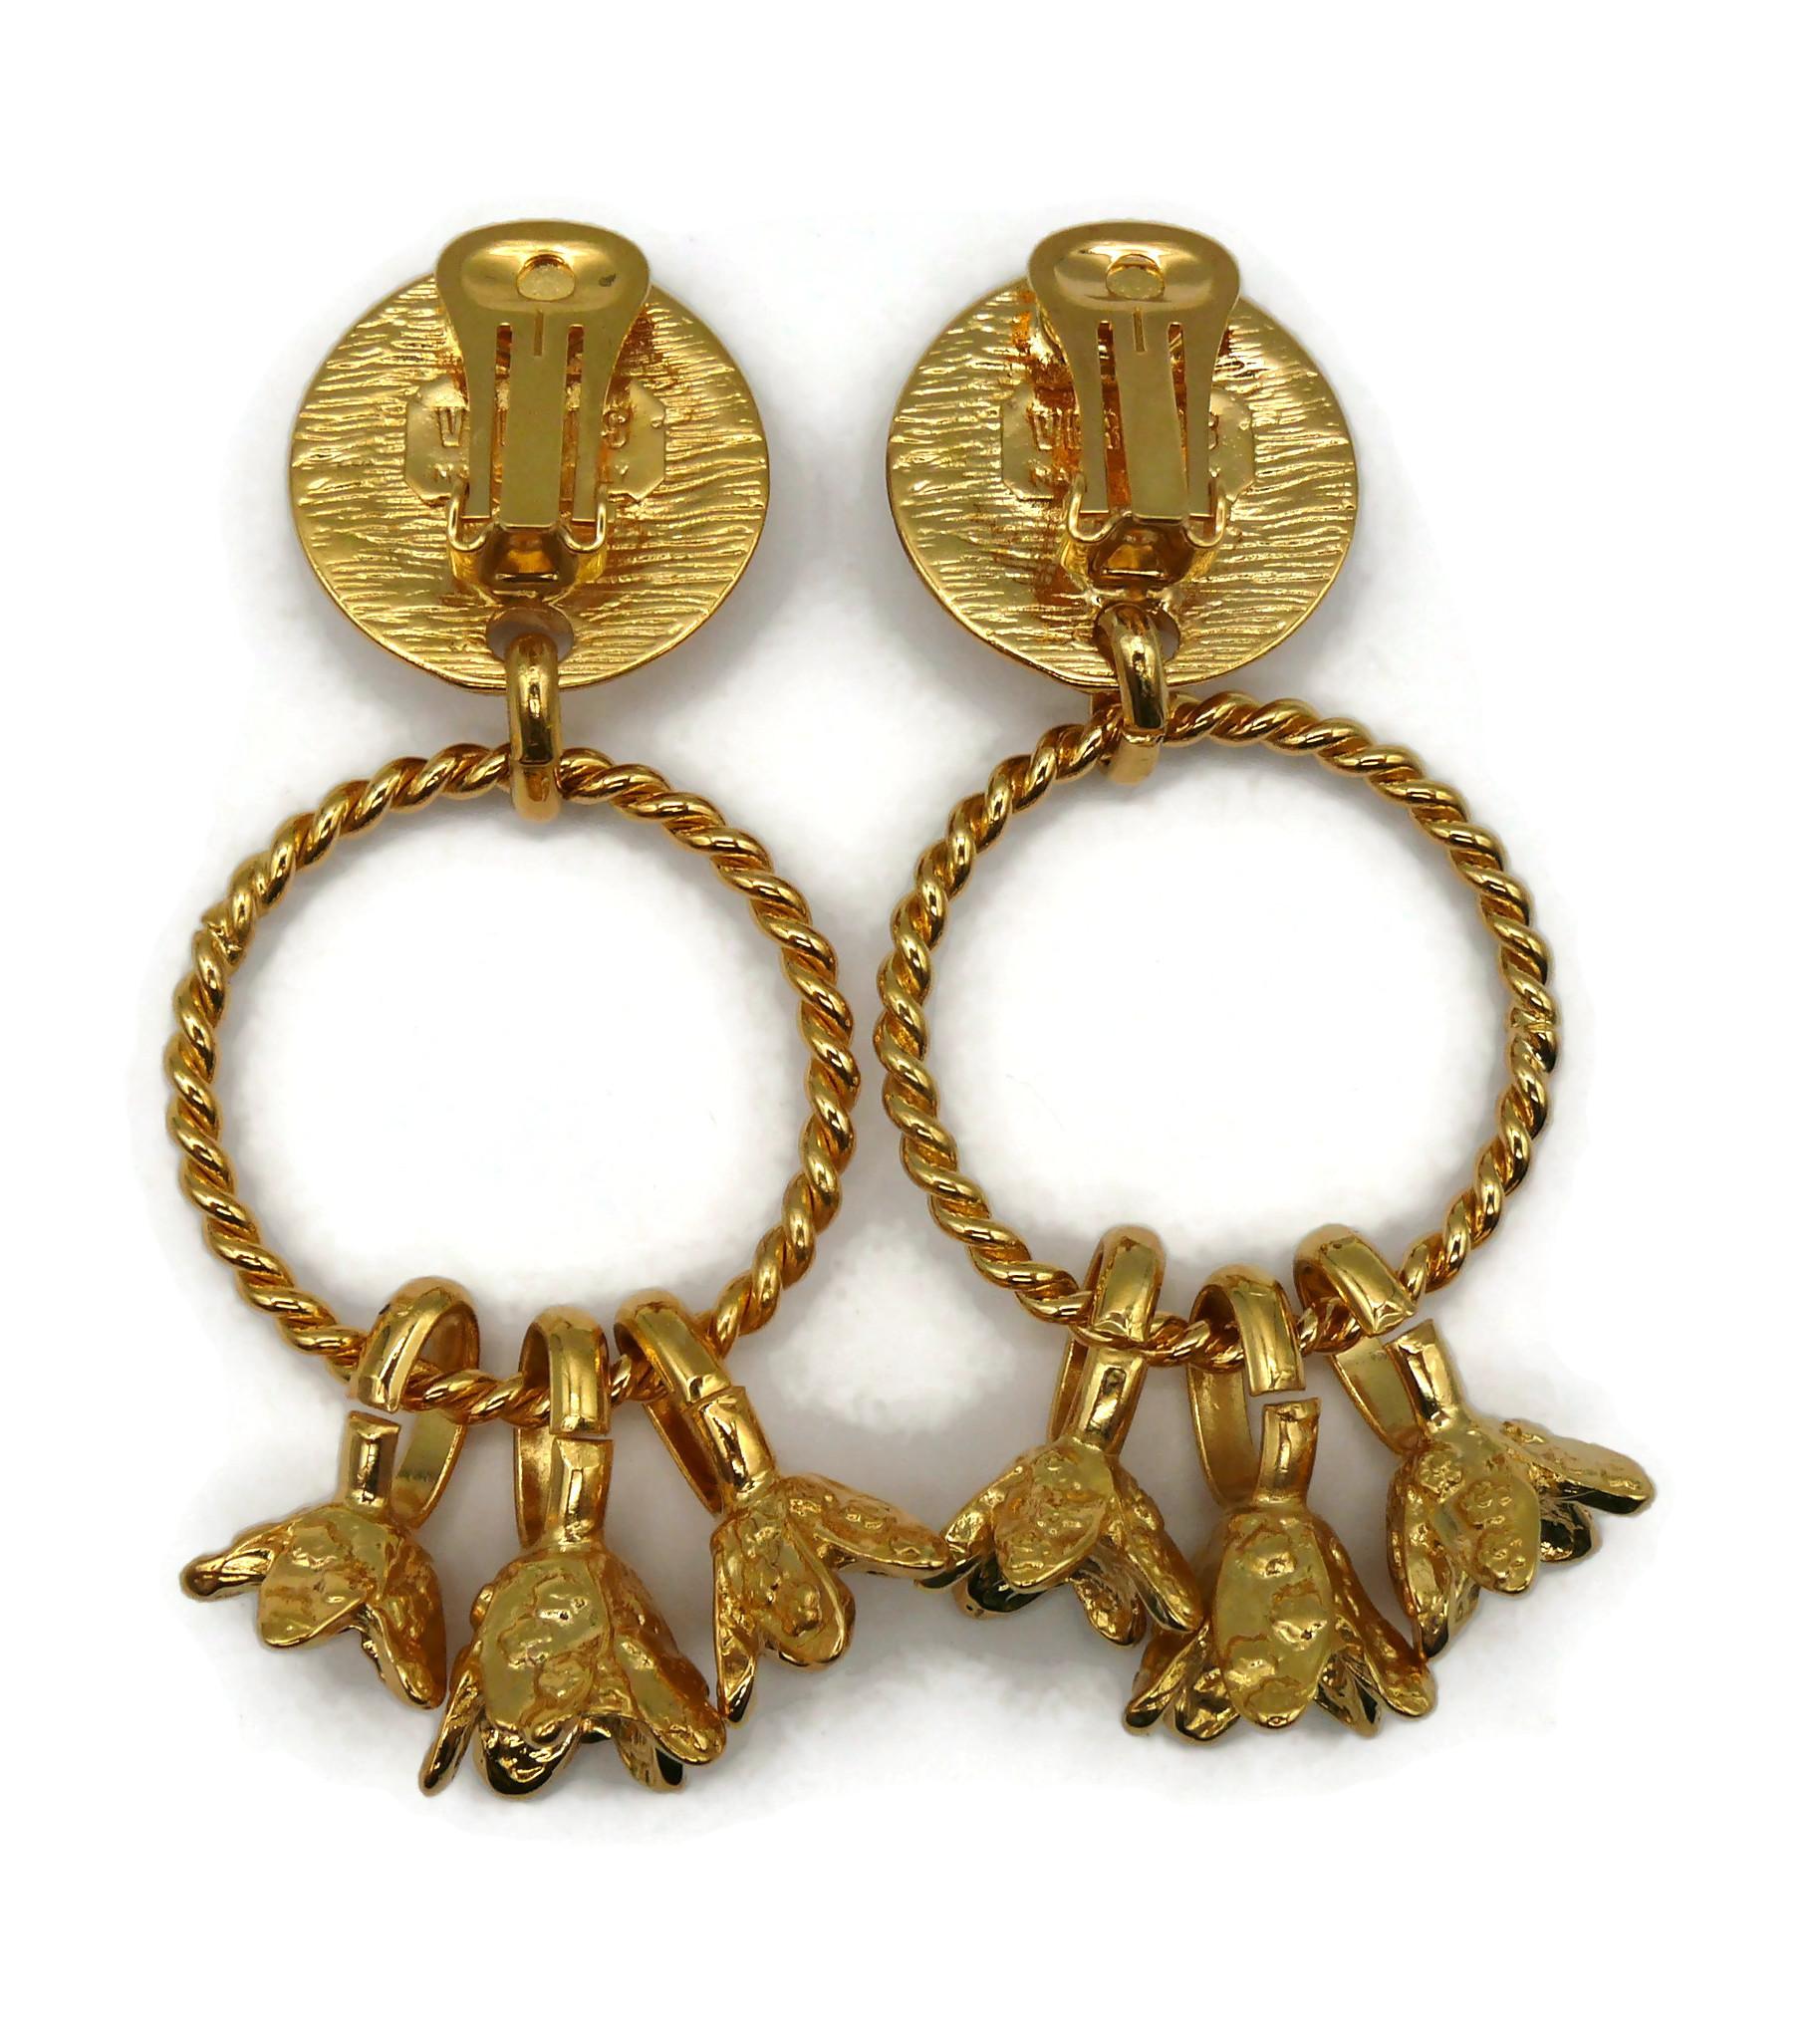 VERSUS by GIANNI VERSACE Vintage Gold Tone Lion Head Dangling Earrings For Sale 3